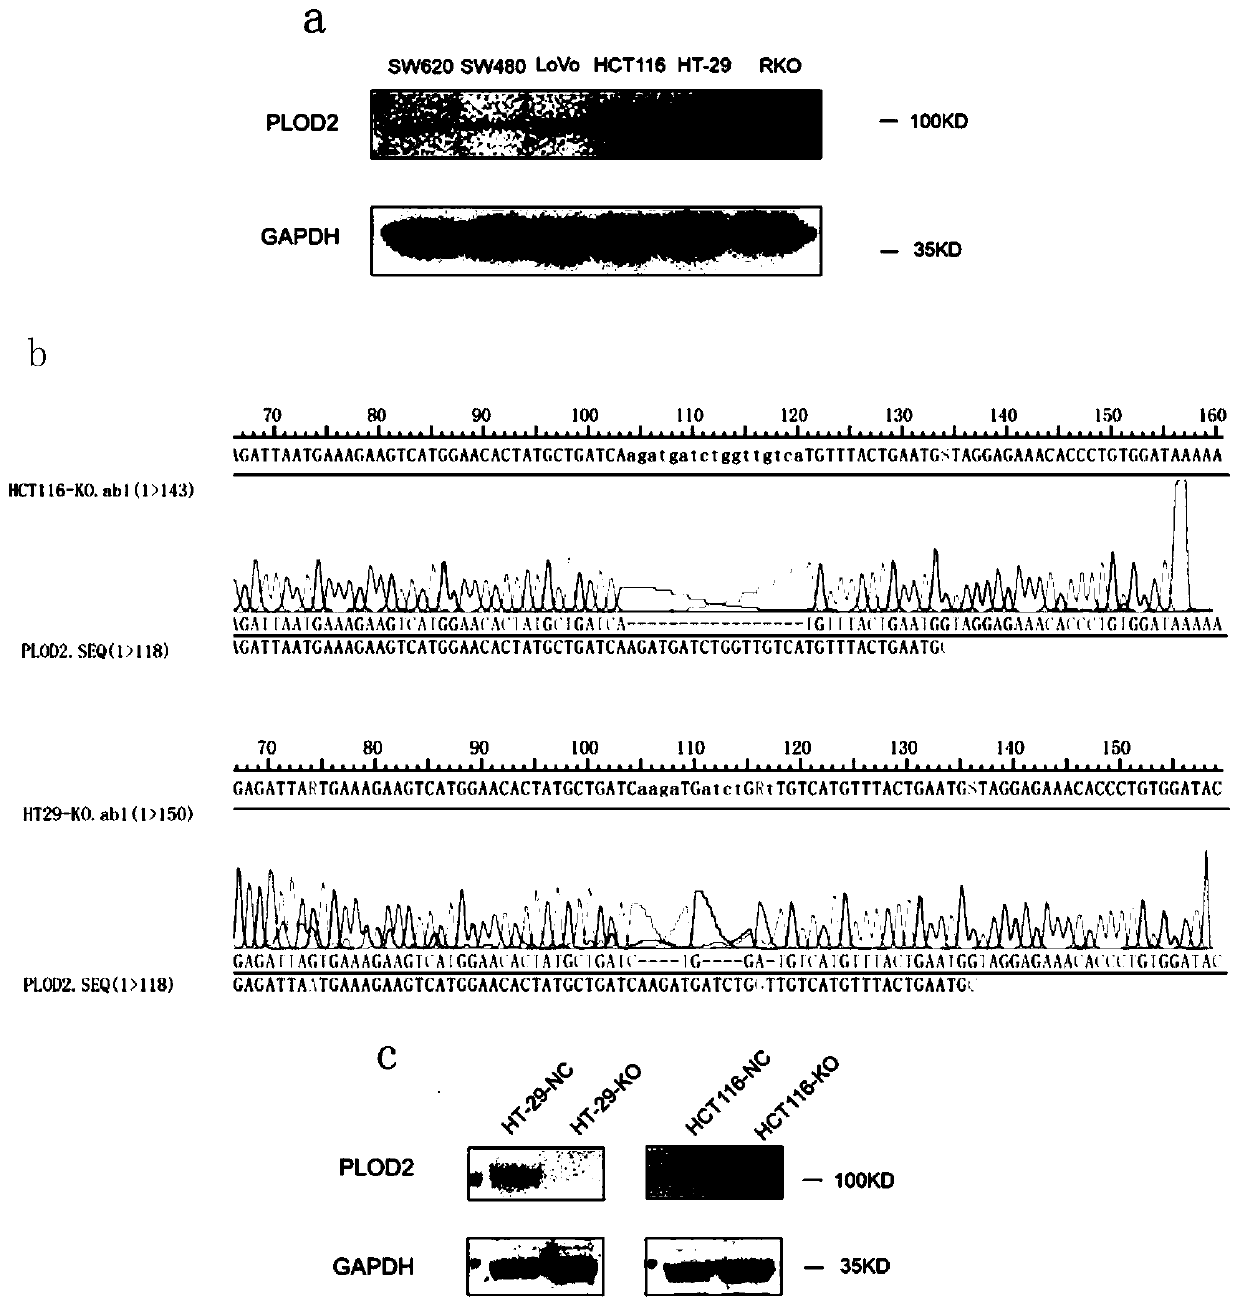 Application of small-molecule inhibitor minoxidil of PLOD2 in tumor treatment